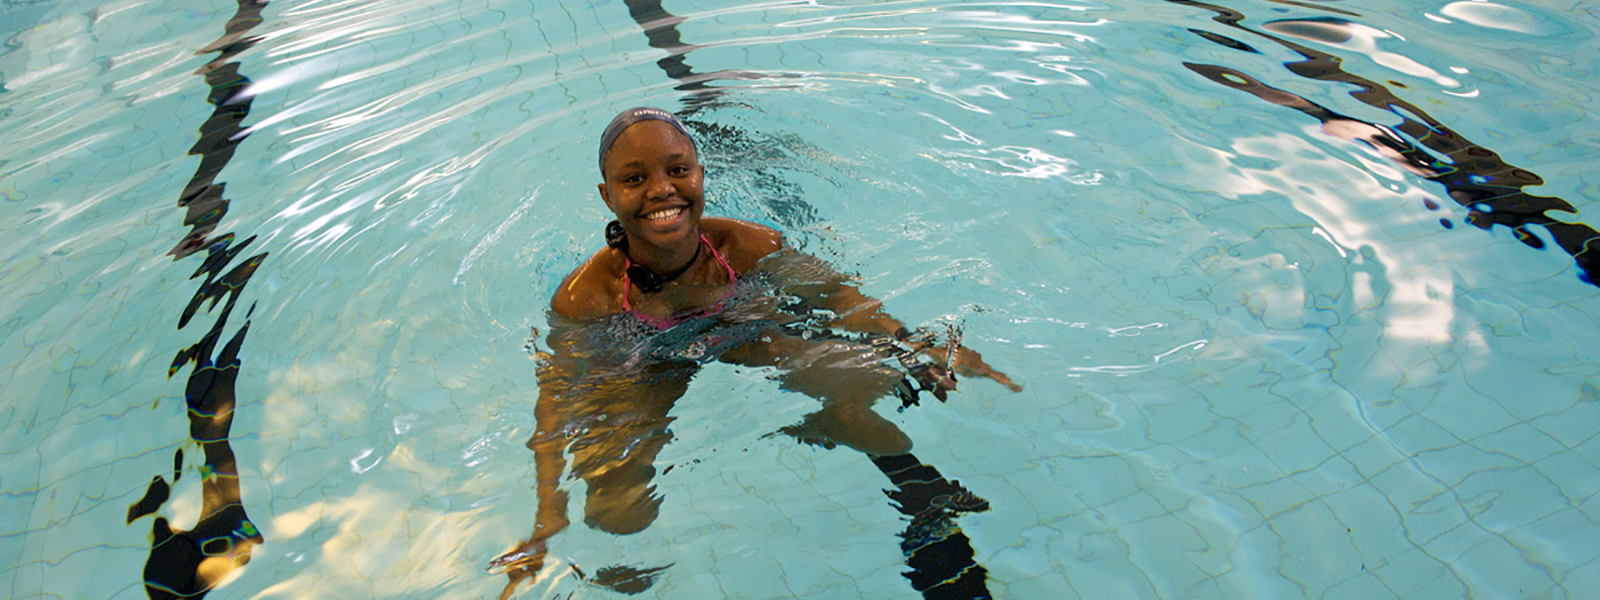 A female at the University of Strathclyde swimming pool